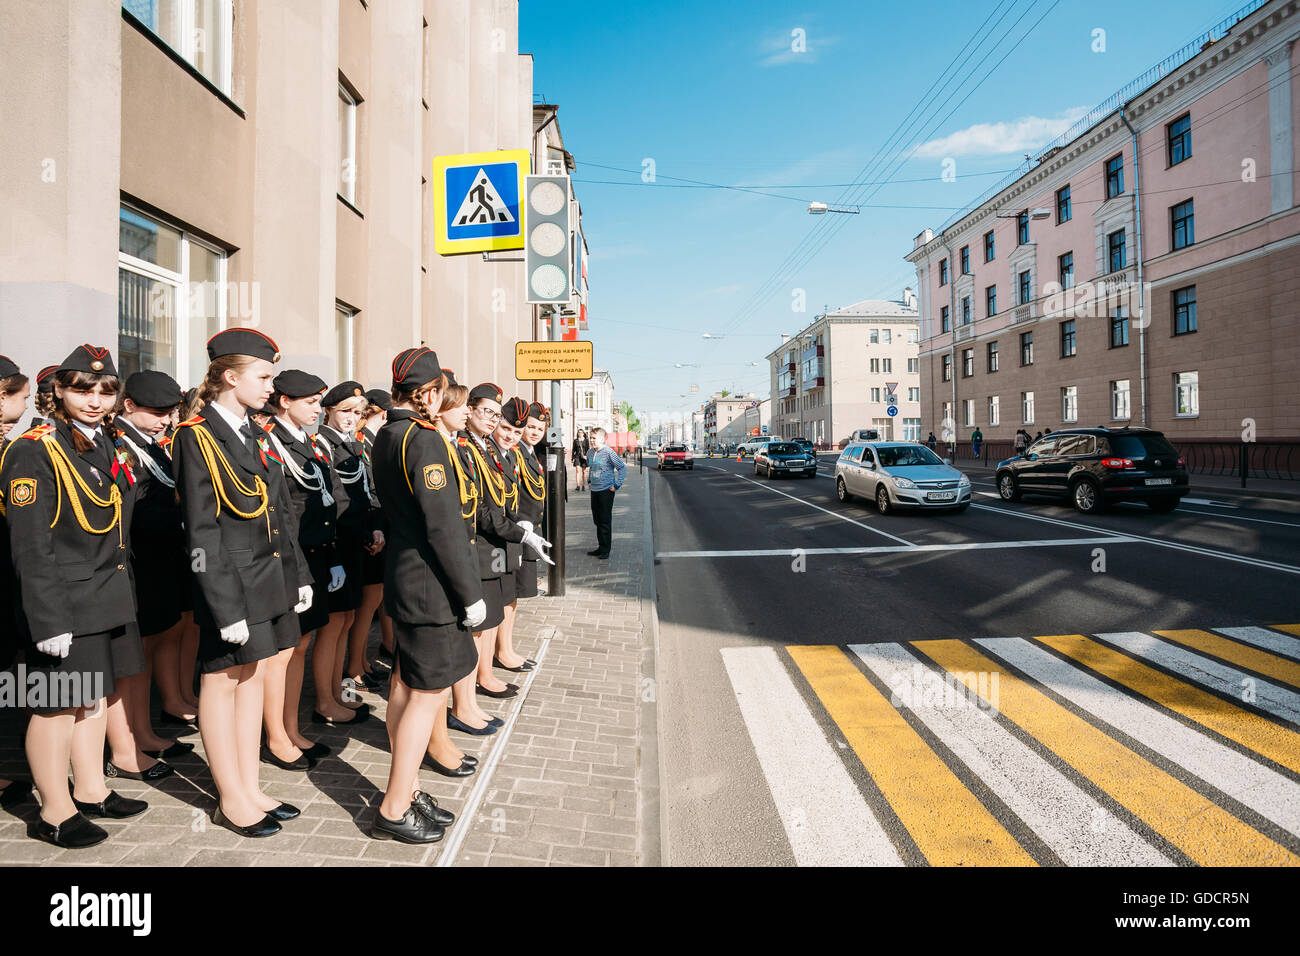 The Formation Of Young Girls In Cadet Unform Of Gomel State Cadet School By Crosswalk. Preparing For The 9th May Victory Parade Stock Photo